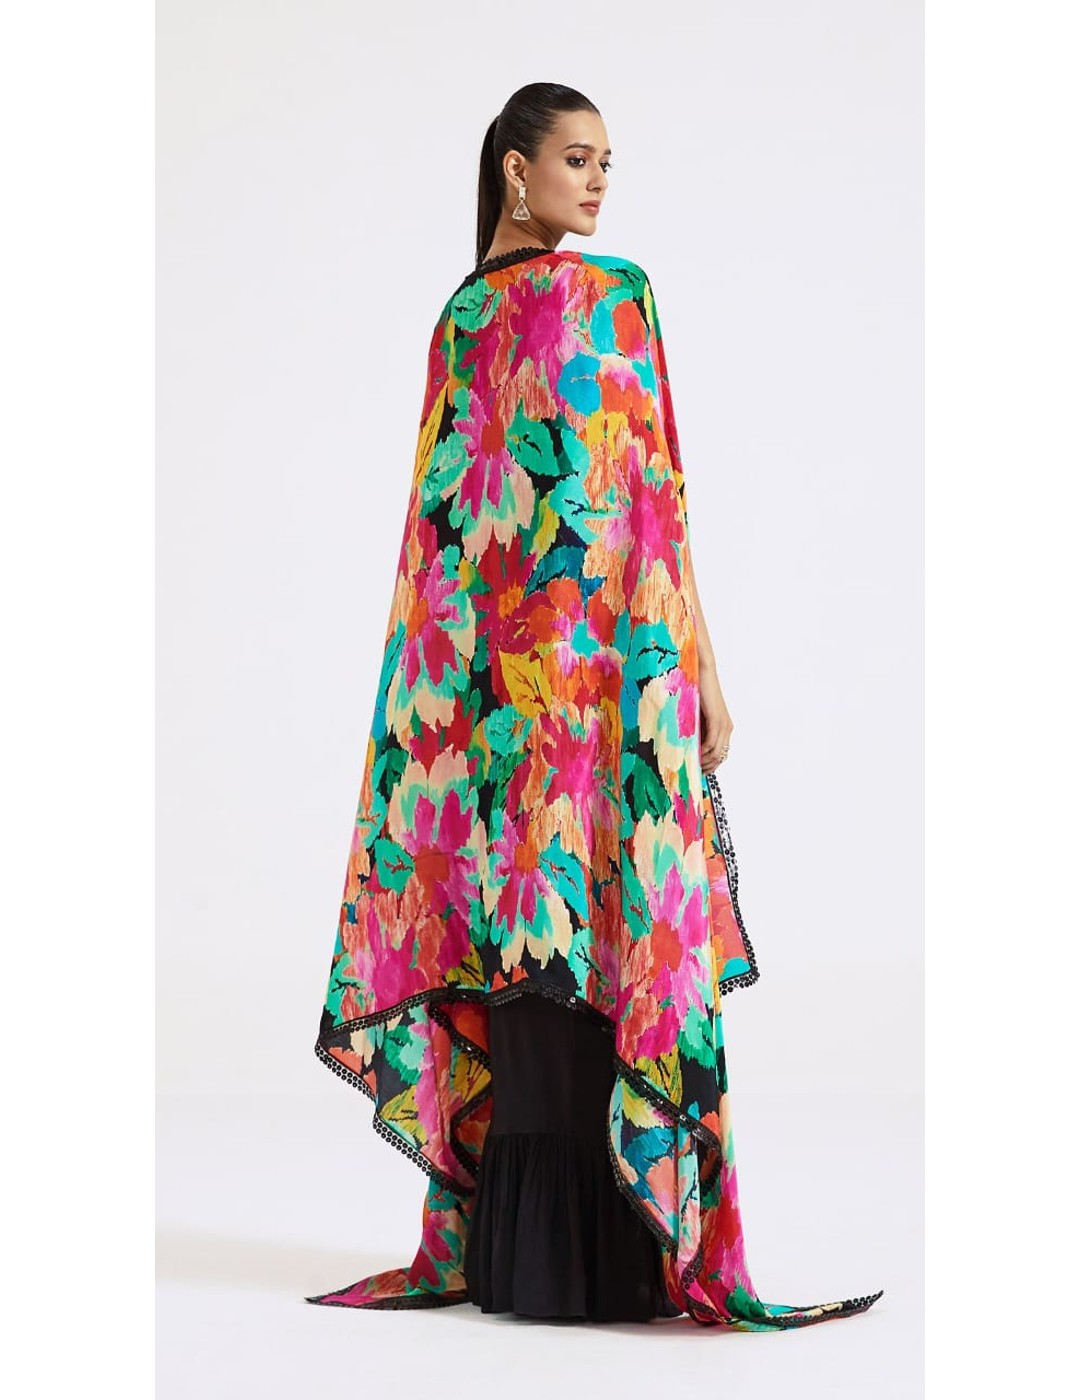 Multicoloured Skirt Set With Cape